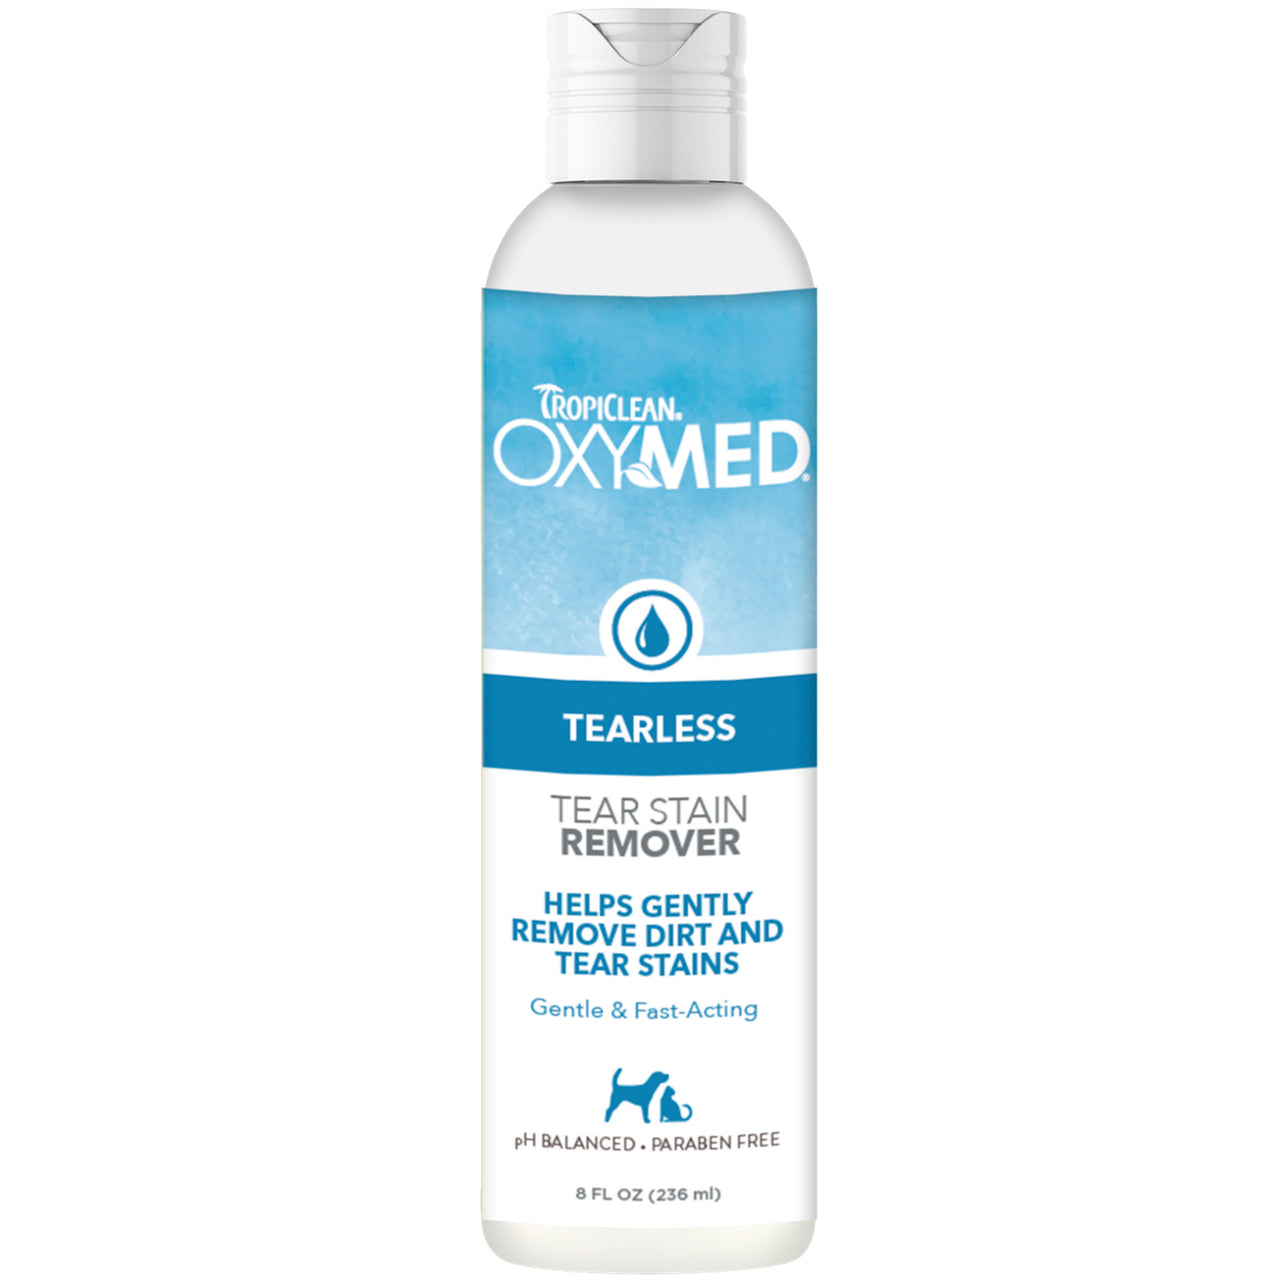 TropiClean OxyMed Tear Stain Remover